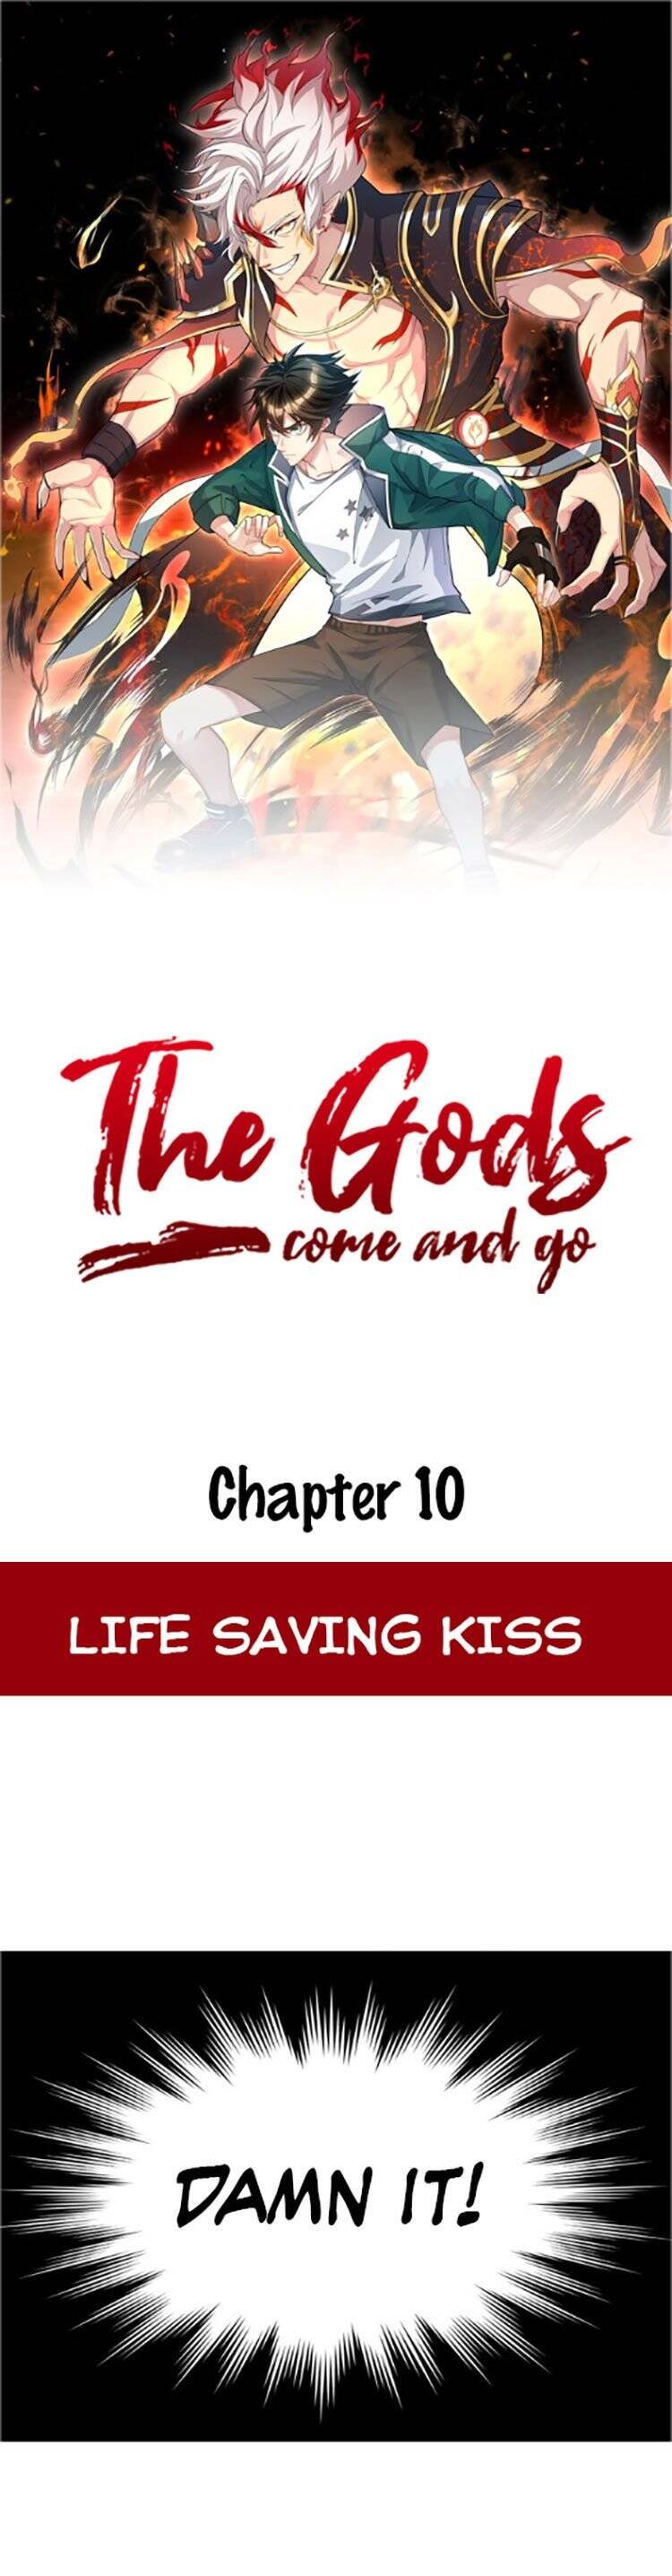 The Gods, Comes And Go - Page 2